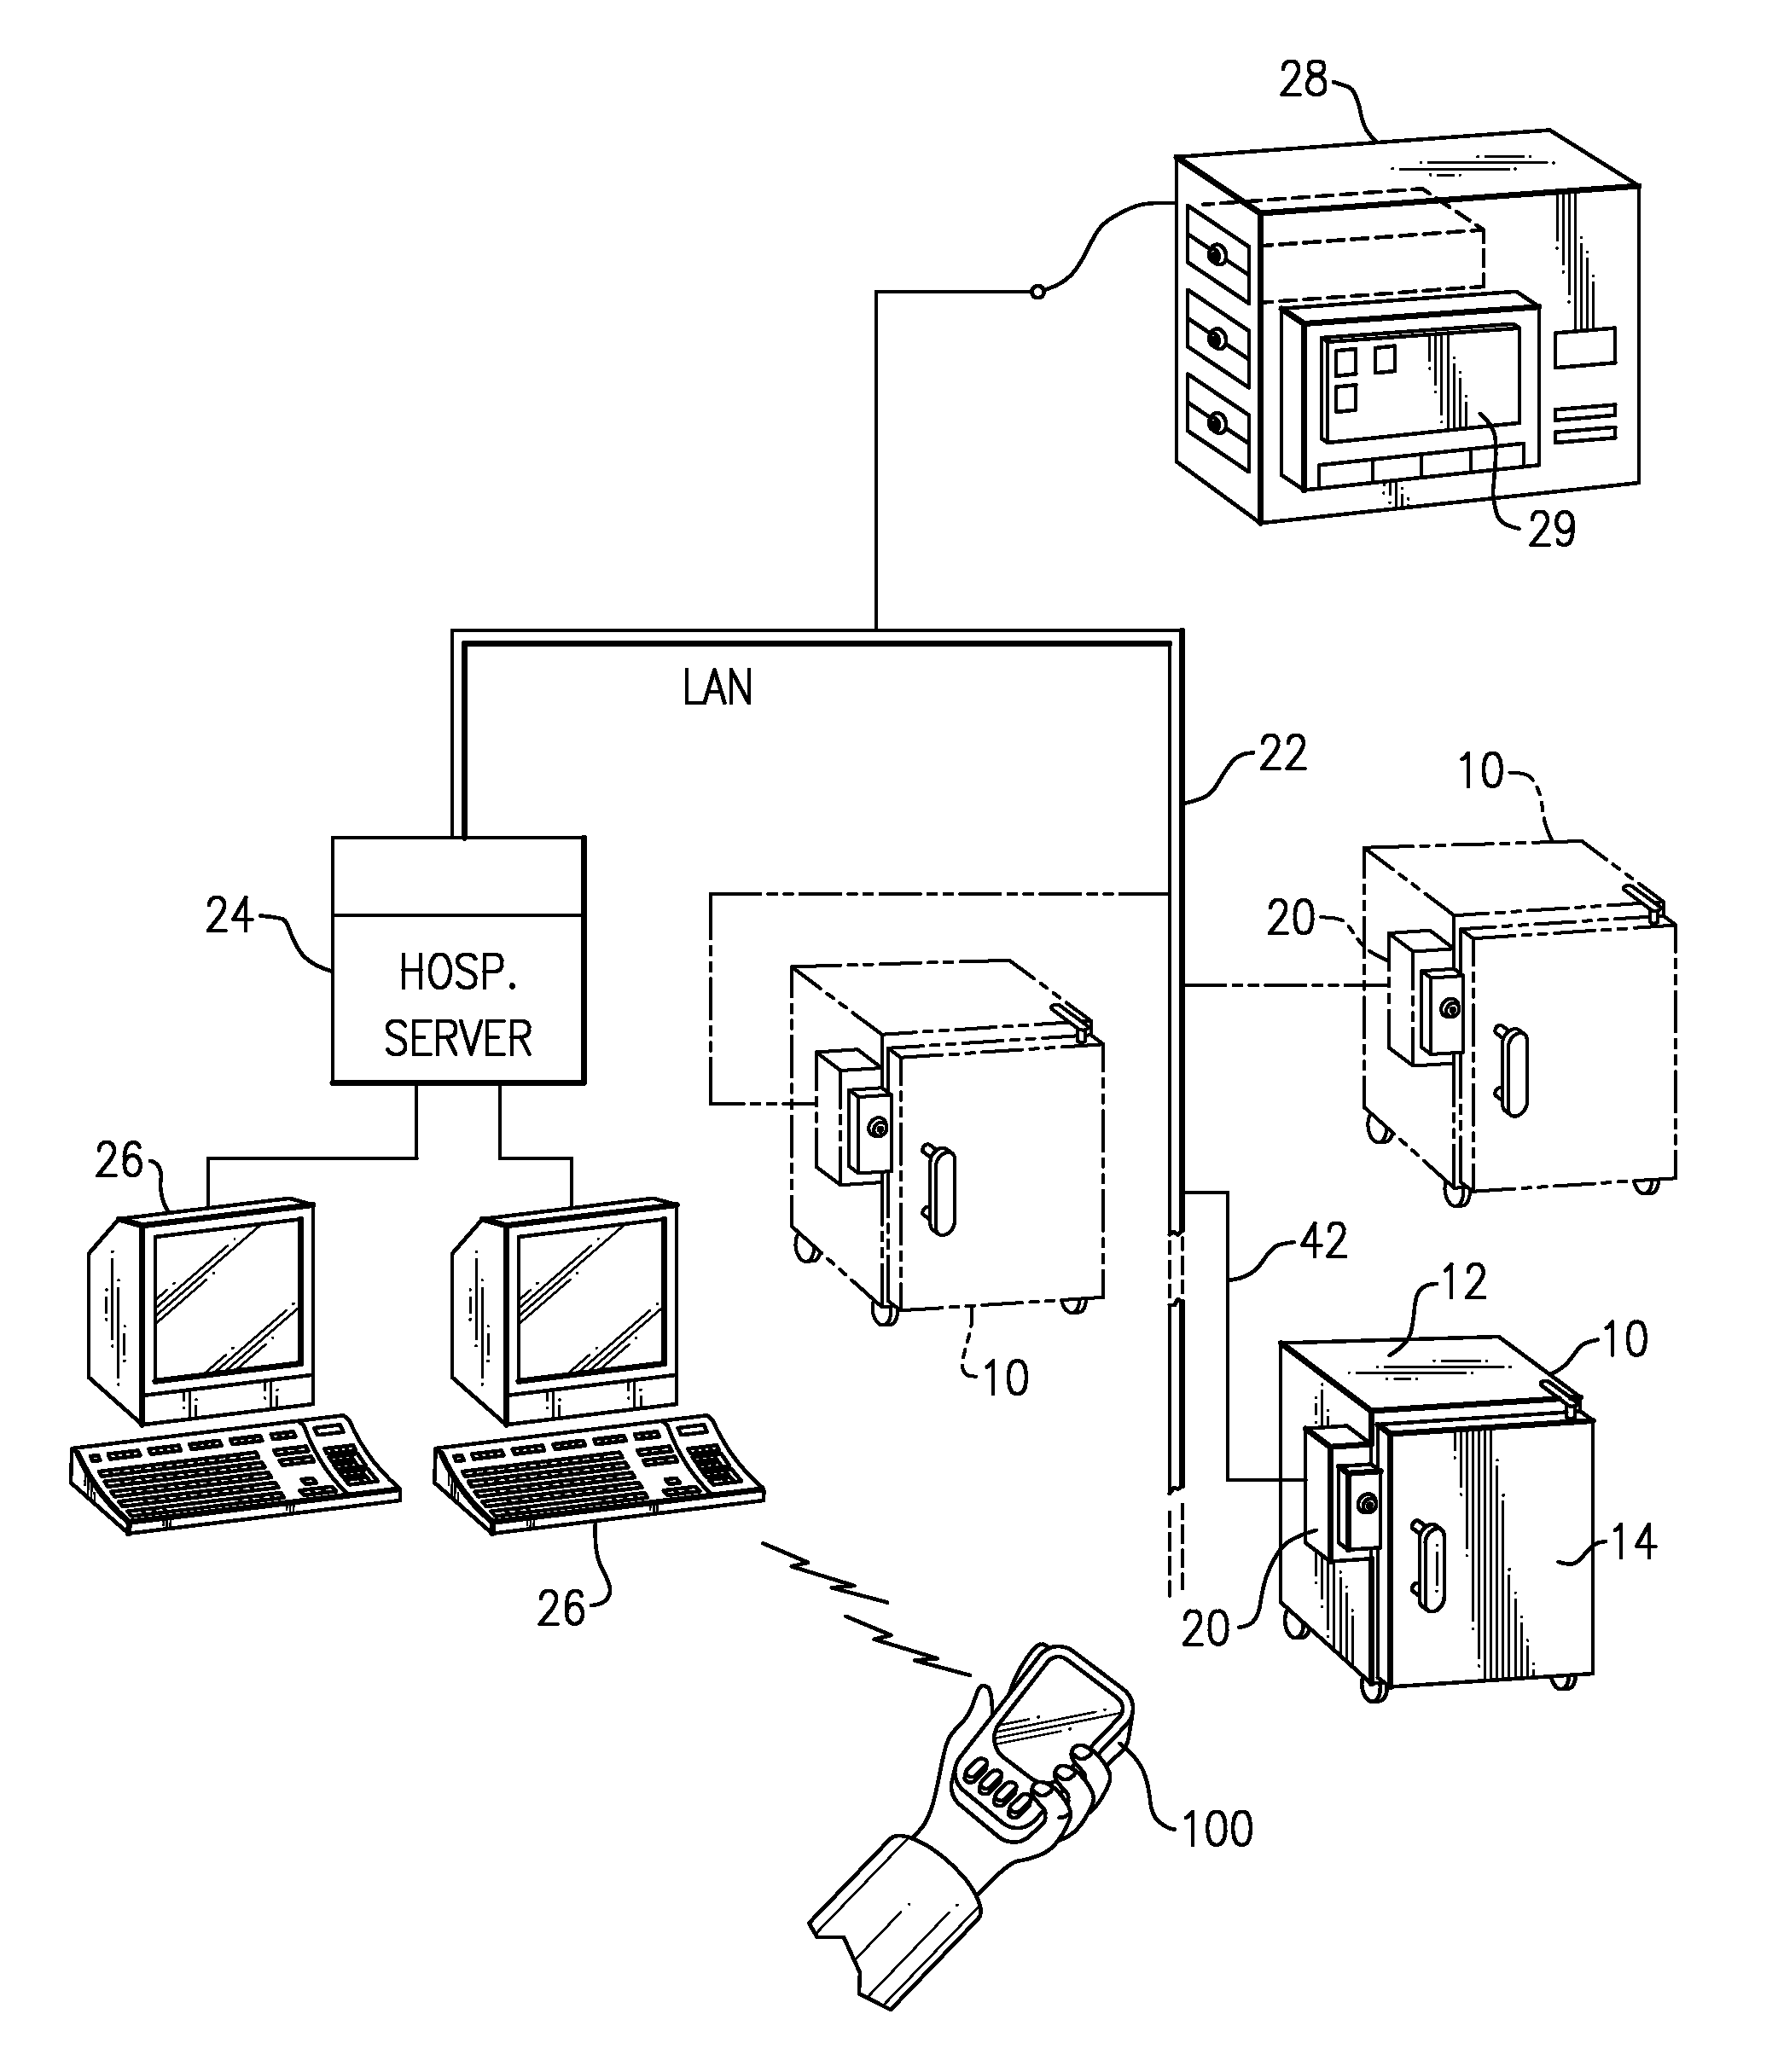 Remotely actuated refrigerator lock with thermal spoilage protection